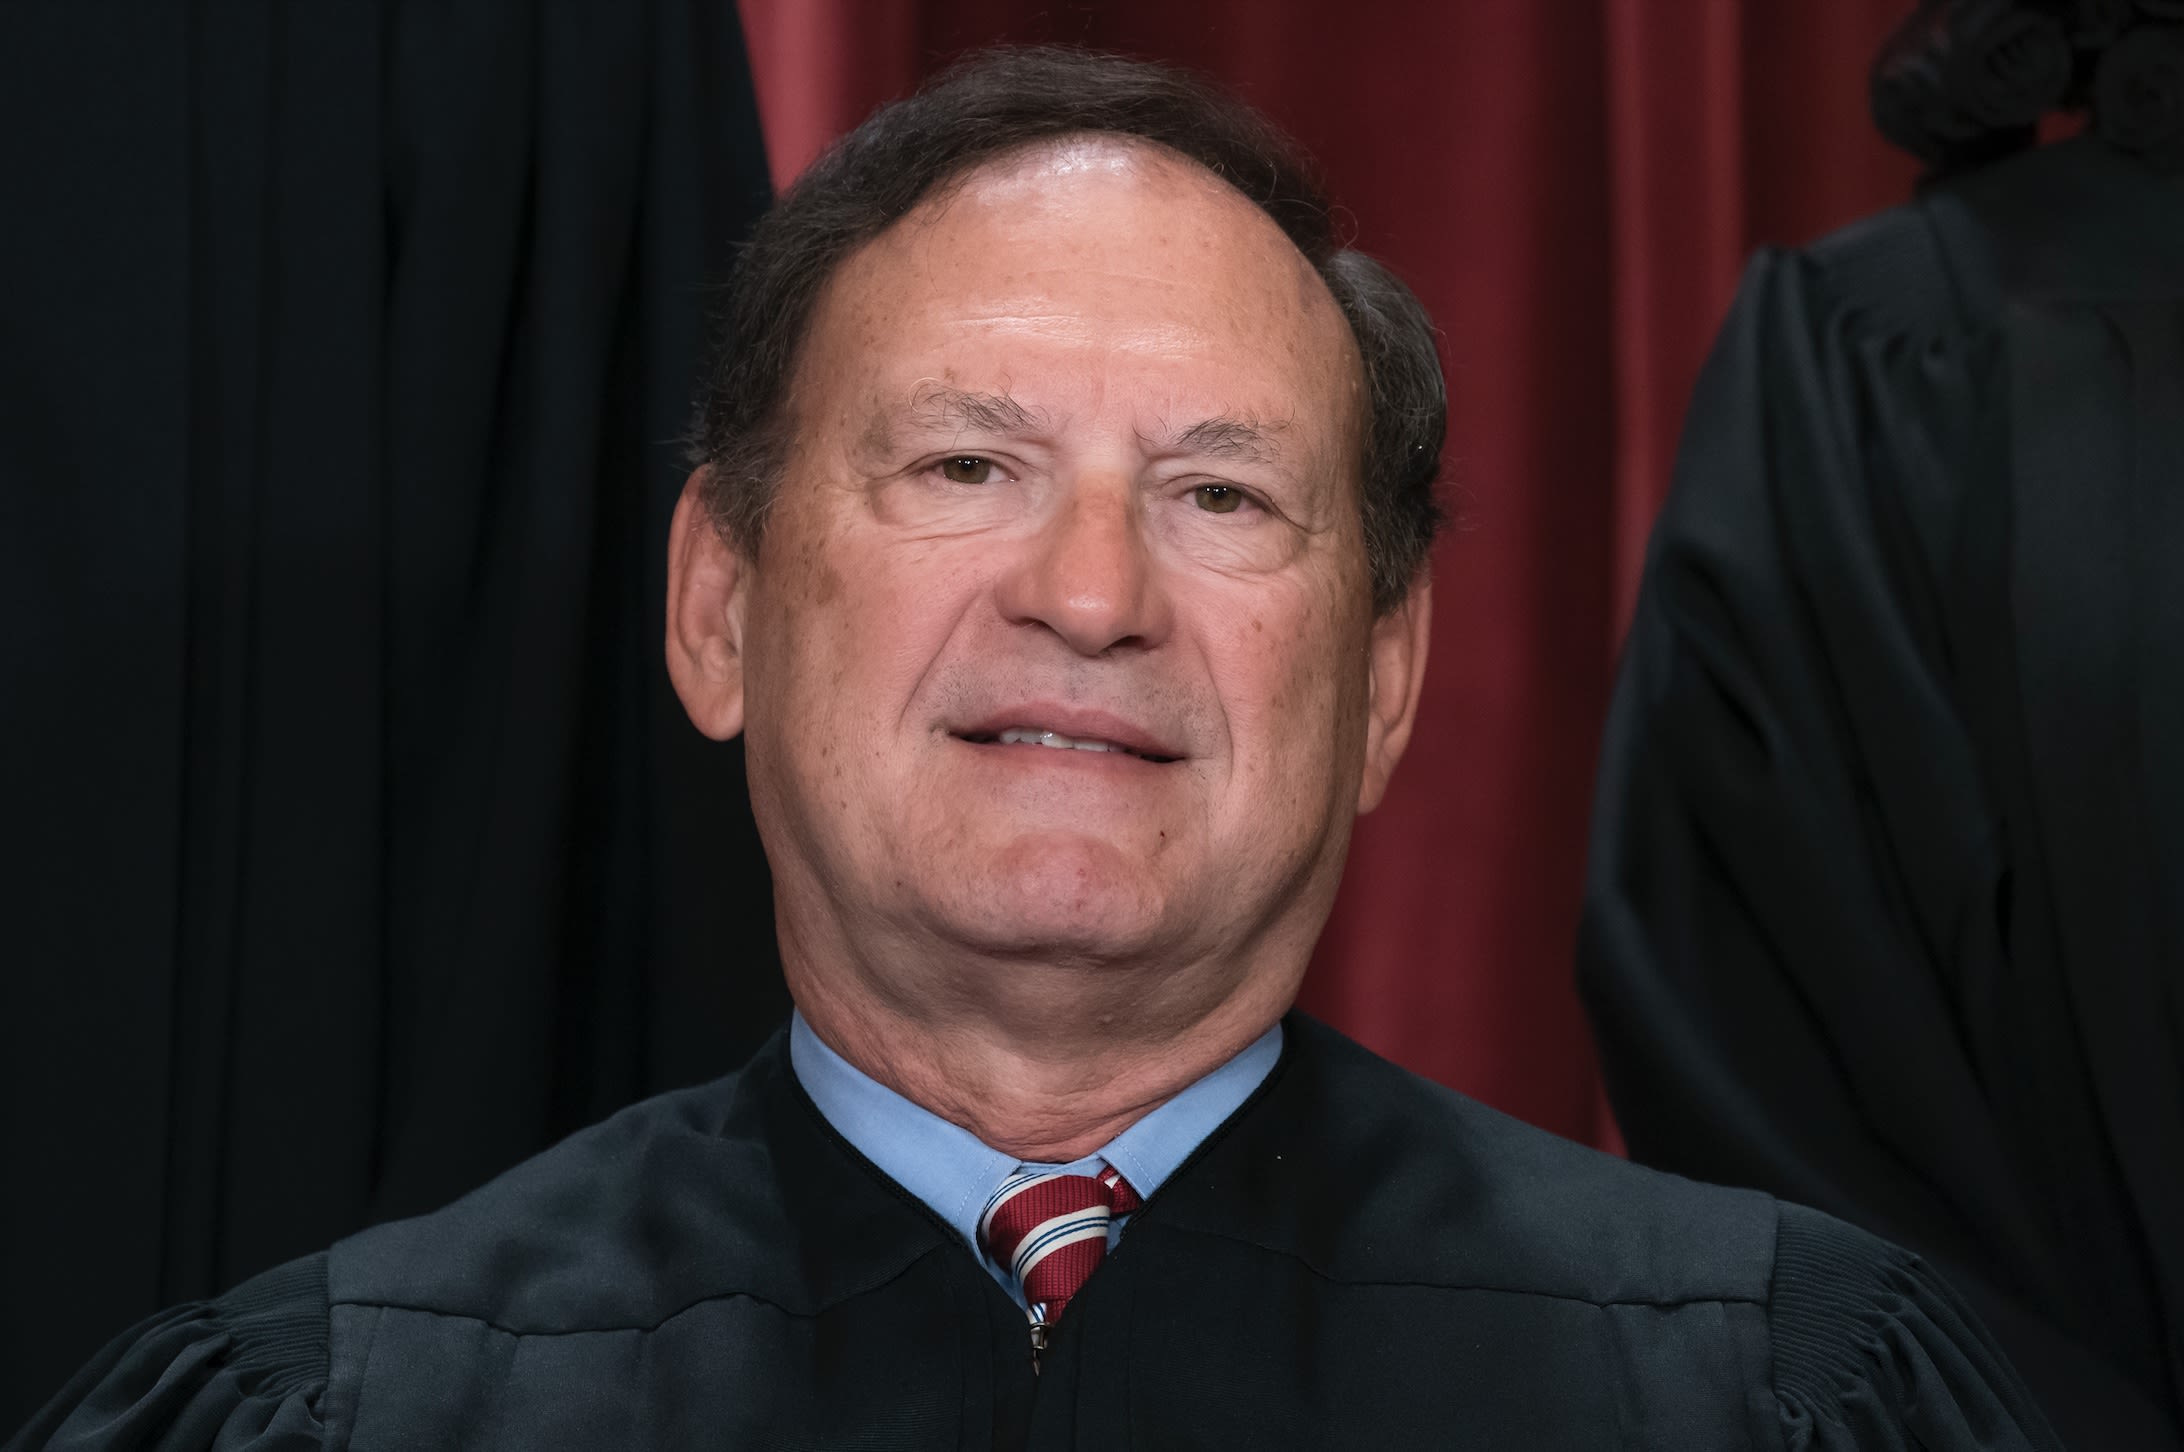 Justice Alito Claims His Wife Hung Coup Flag Because Neighbor Called Her a C***